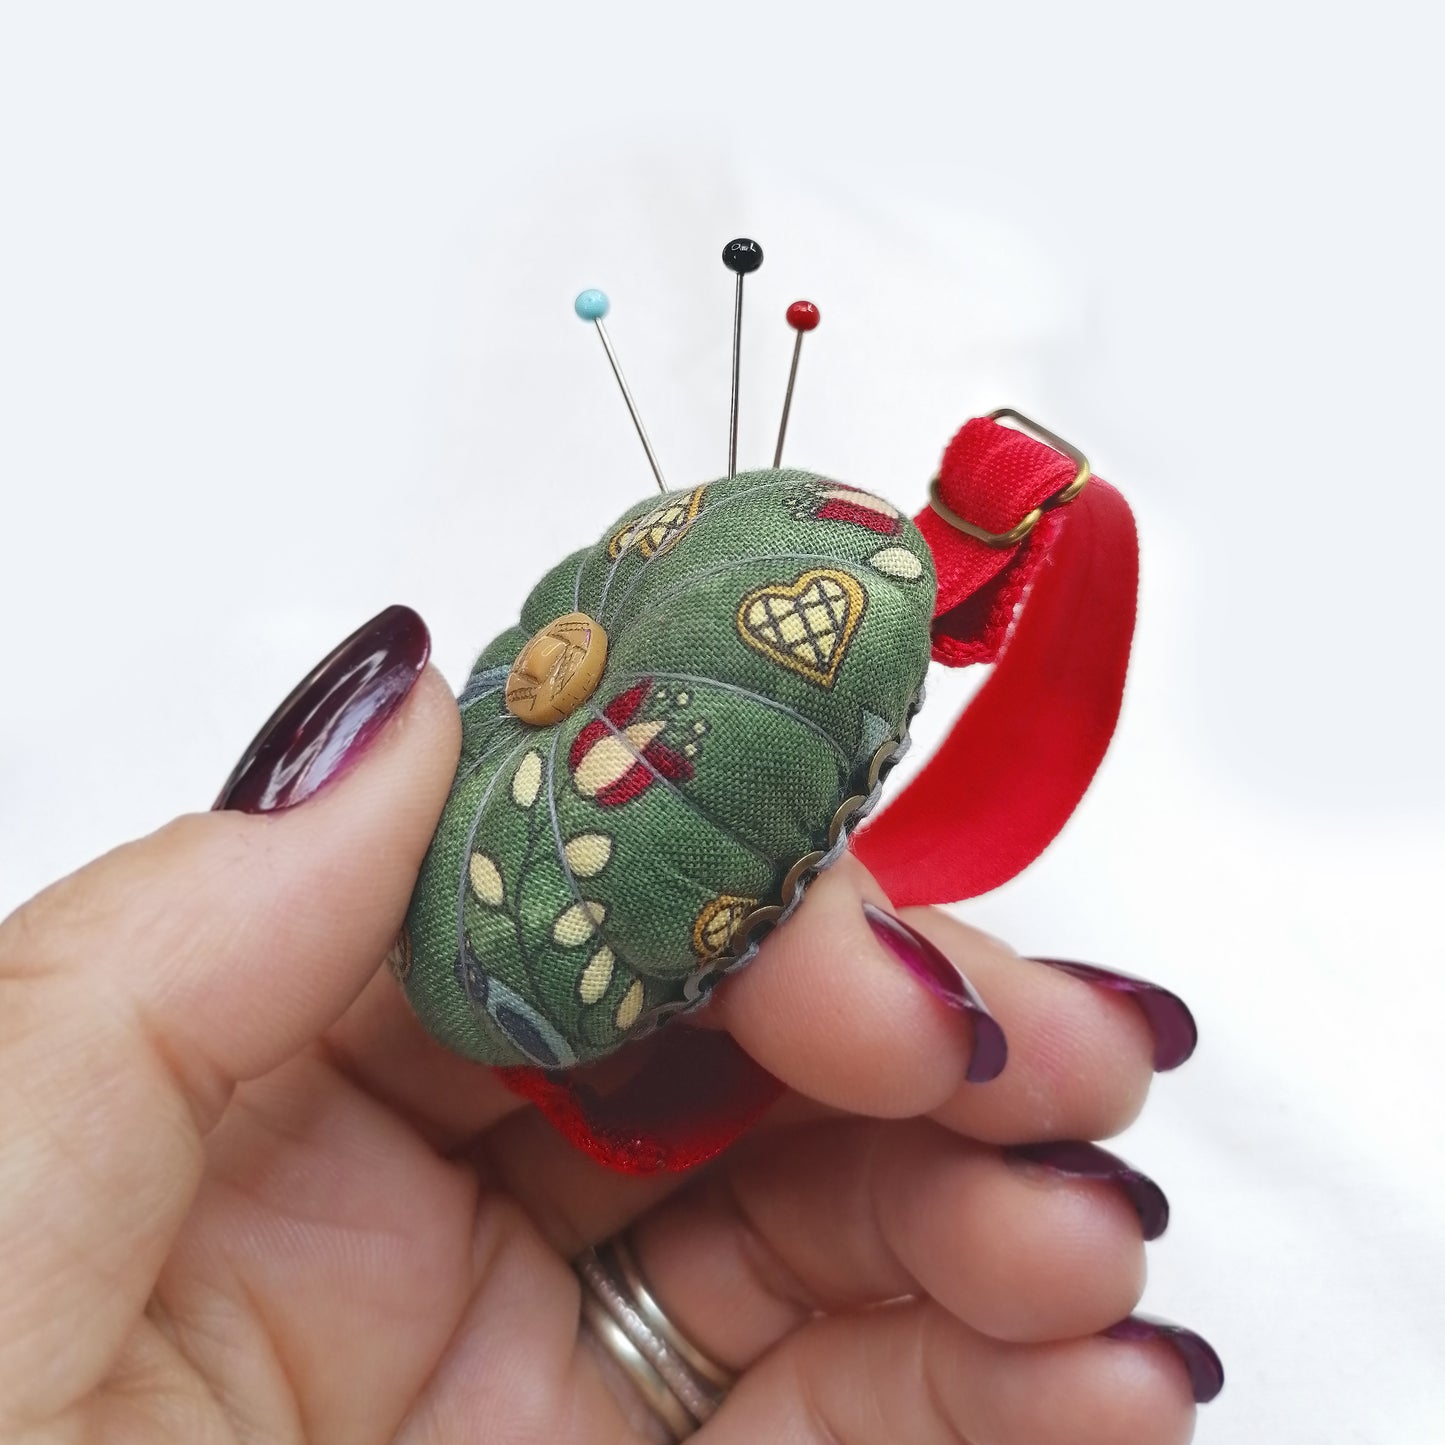 Oval Wrist Pin Cushion - Vintage Button Collection